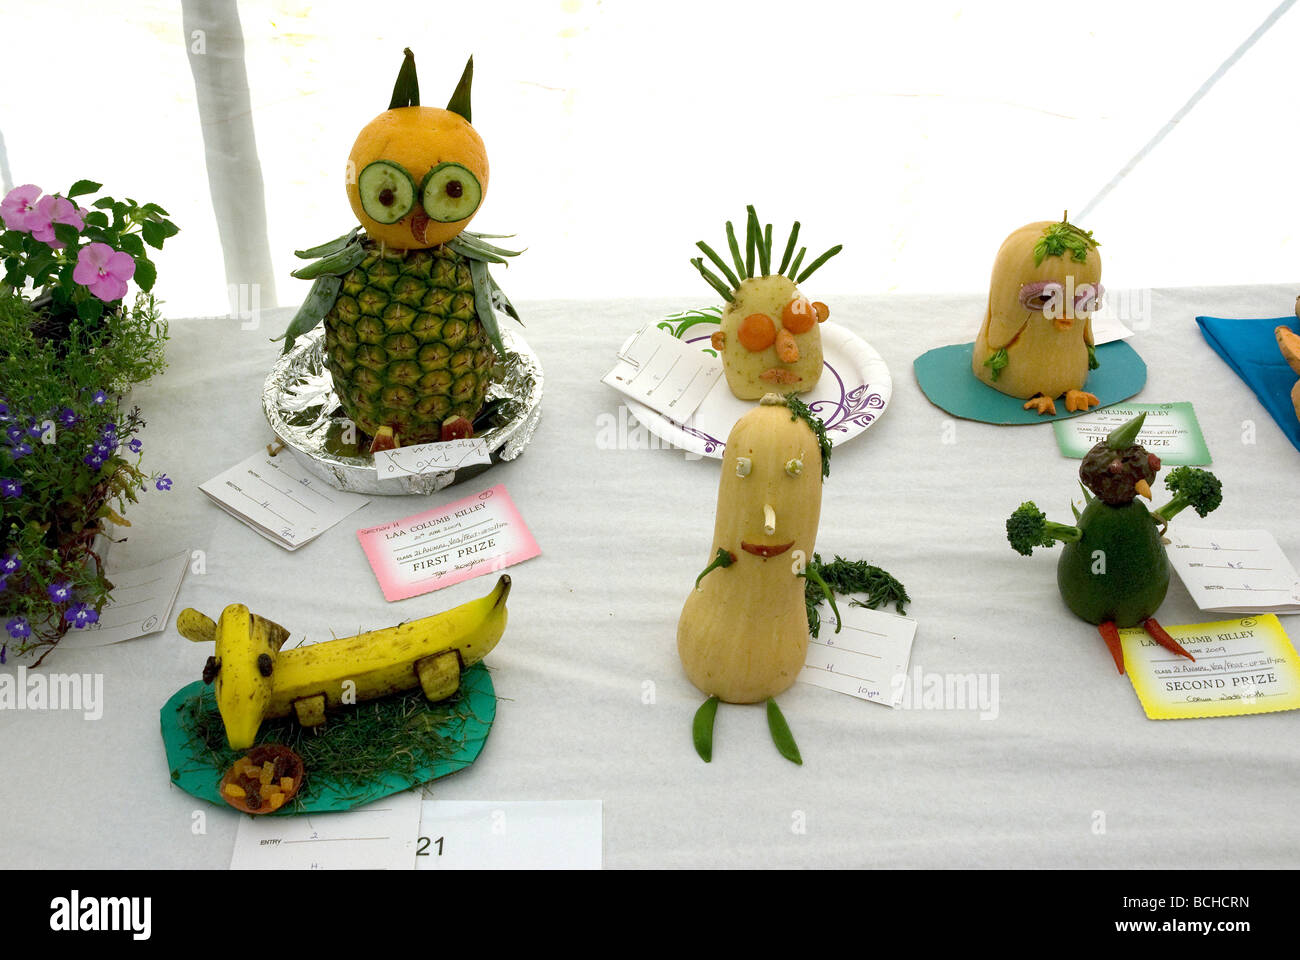 Animals made out of fruit at agricultural show Stock Photo